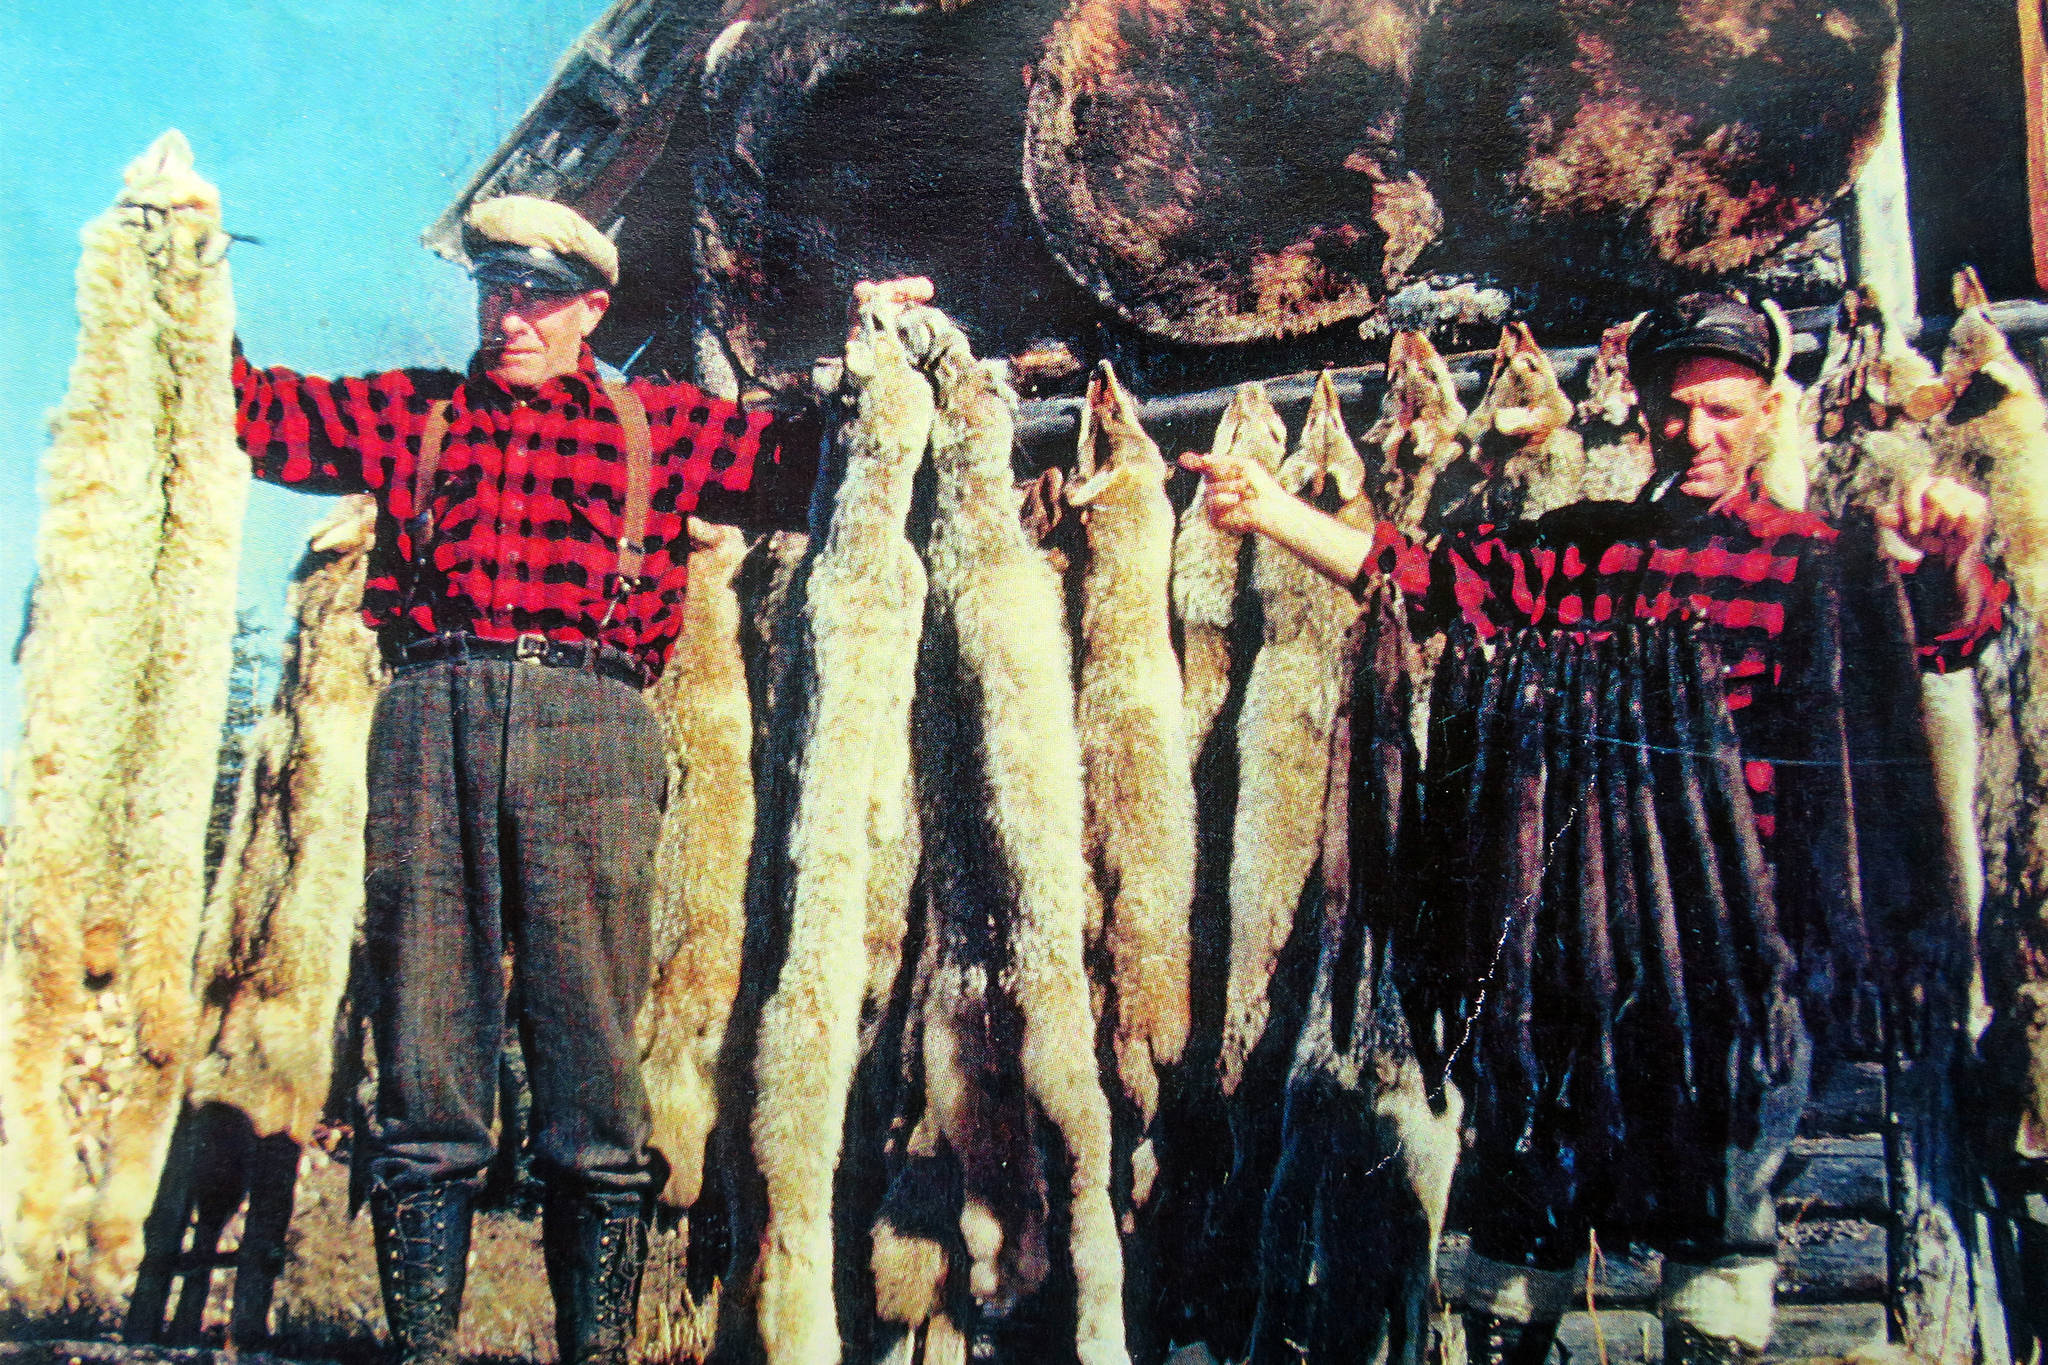 Big Jim (left) and Little Jim show off some of the furs from a recent winter’s trapping season, circa late 1950s. (Photo courtesy of Mona Painter)